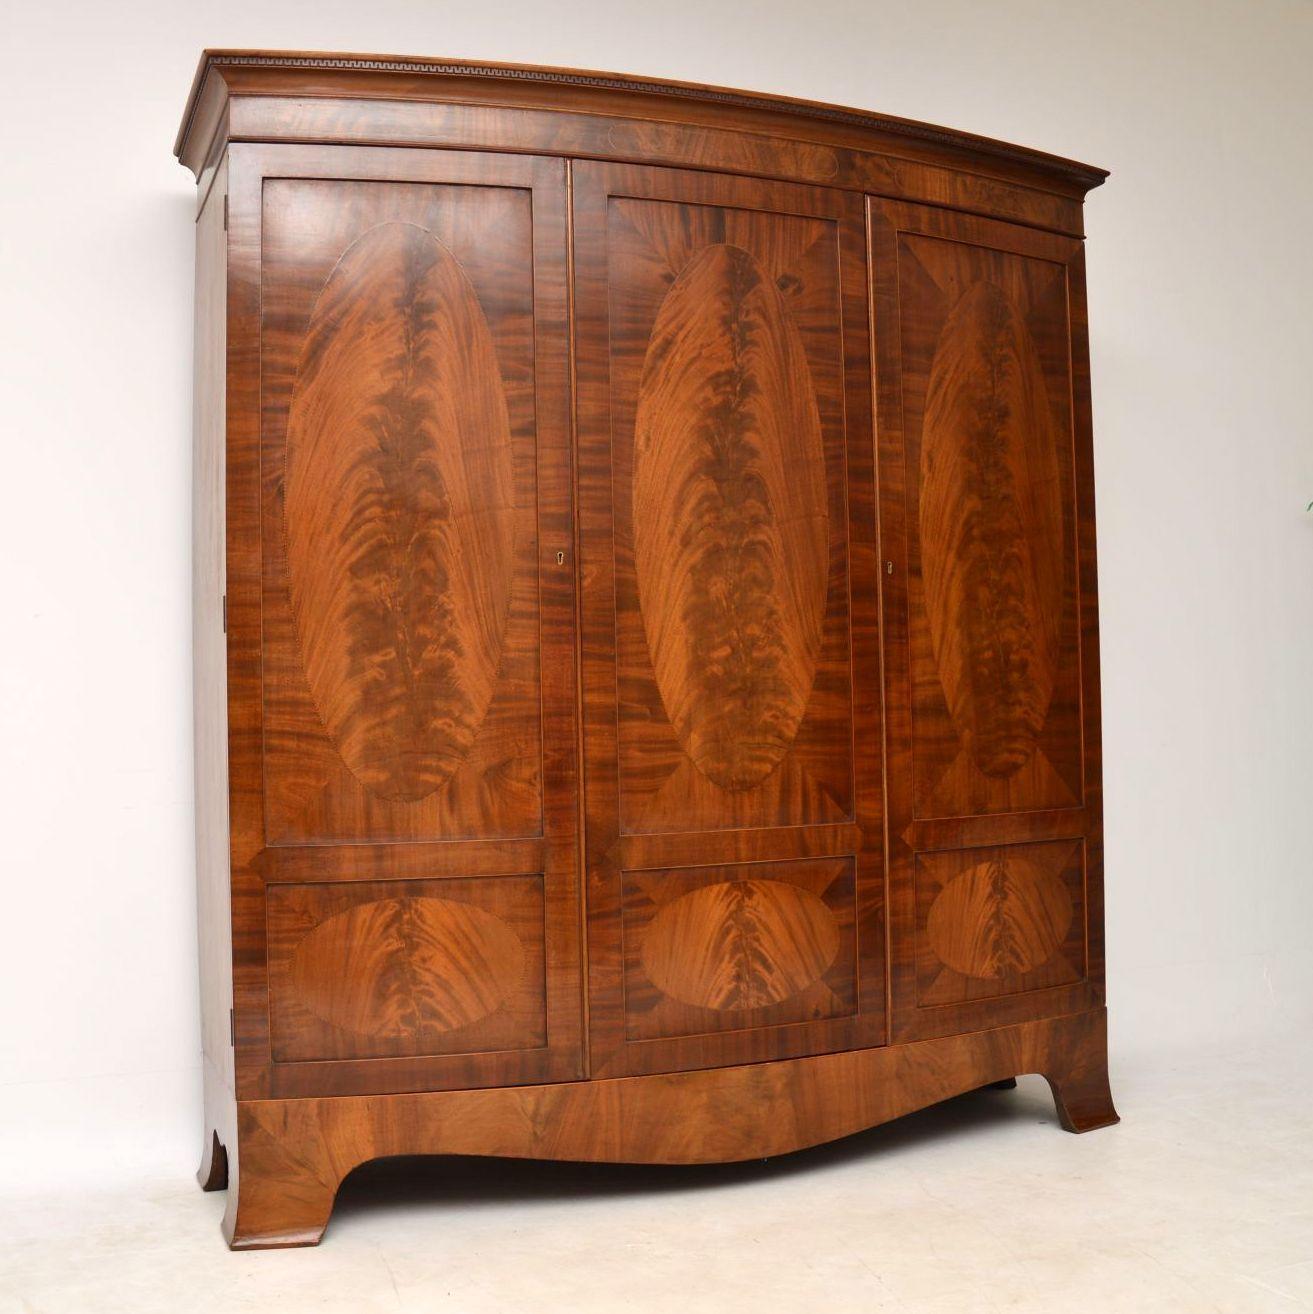 Wonderful quality antique Edwardian bow fronted large wardrobe in excellent condition and dating from the 1890-1910 period. Please enlarge all the images to see the many fine details. This wardrobe has a top cornice with a dental frieze, two outside